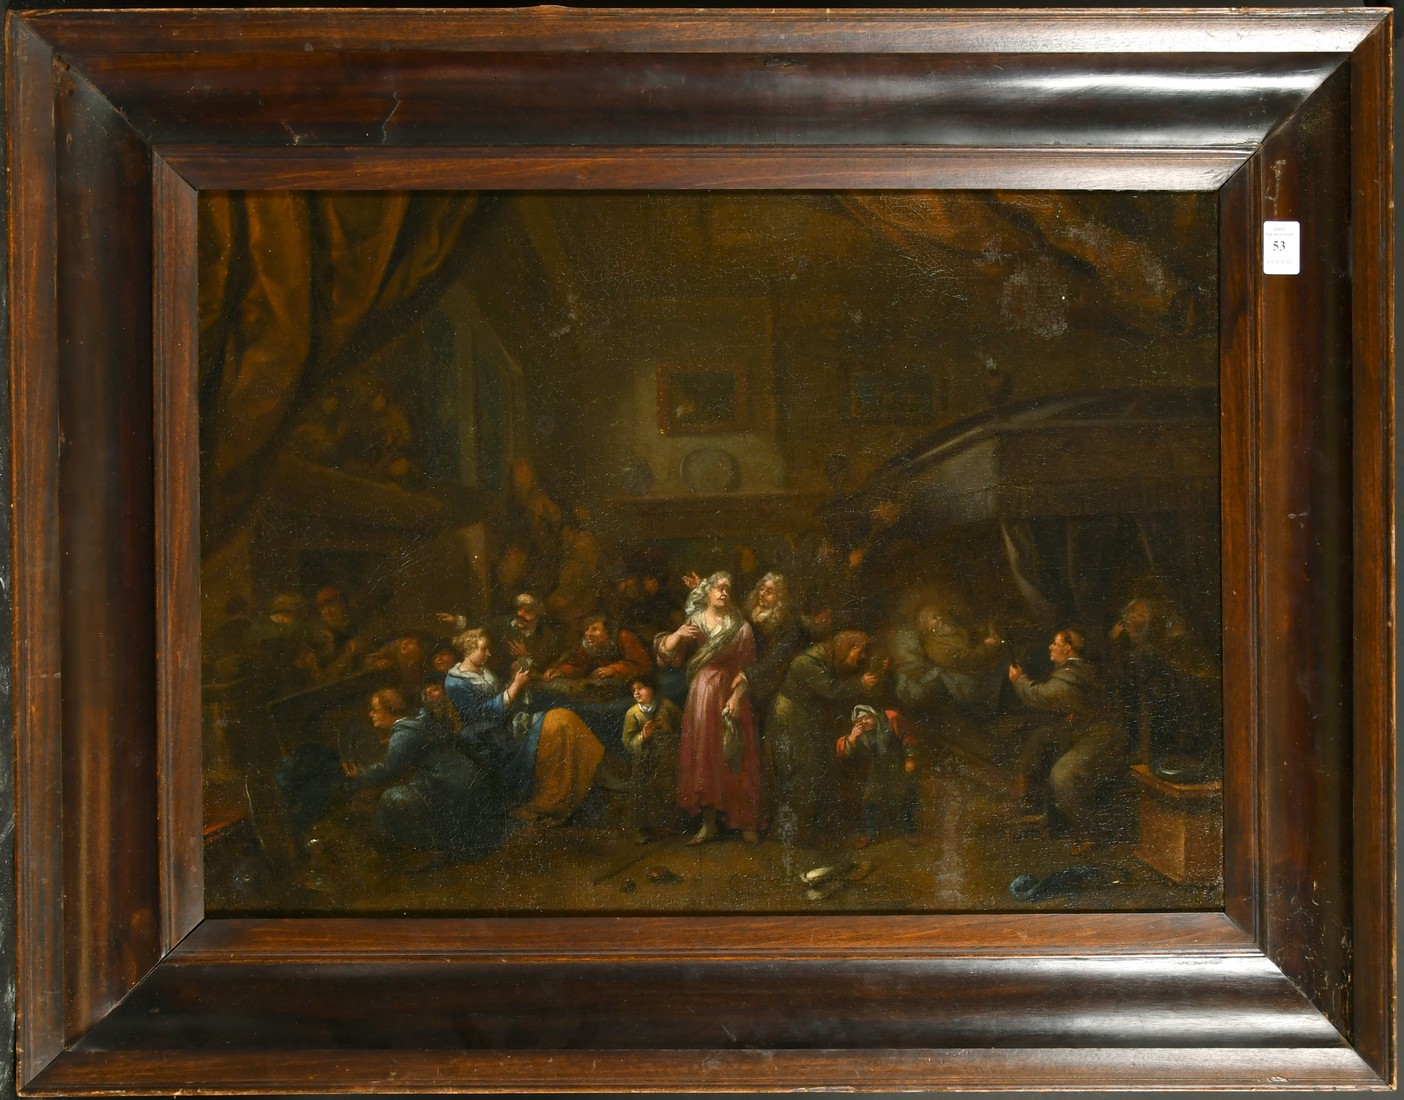 17th/18th Century Flemish School, figures gathered in a lavish interior, oil on canvas, 18.5" x 25", - Image 2 of 3